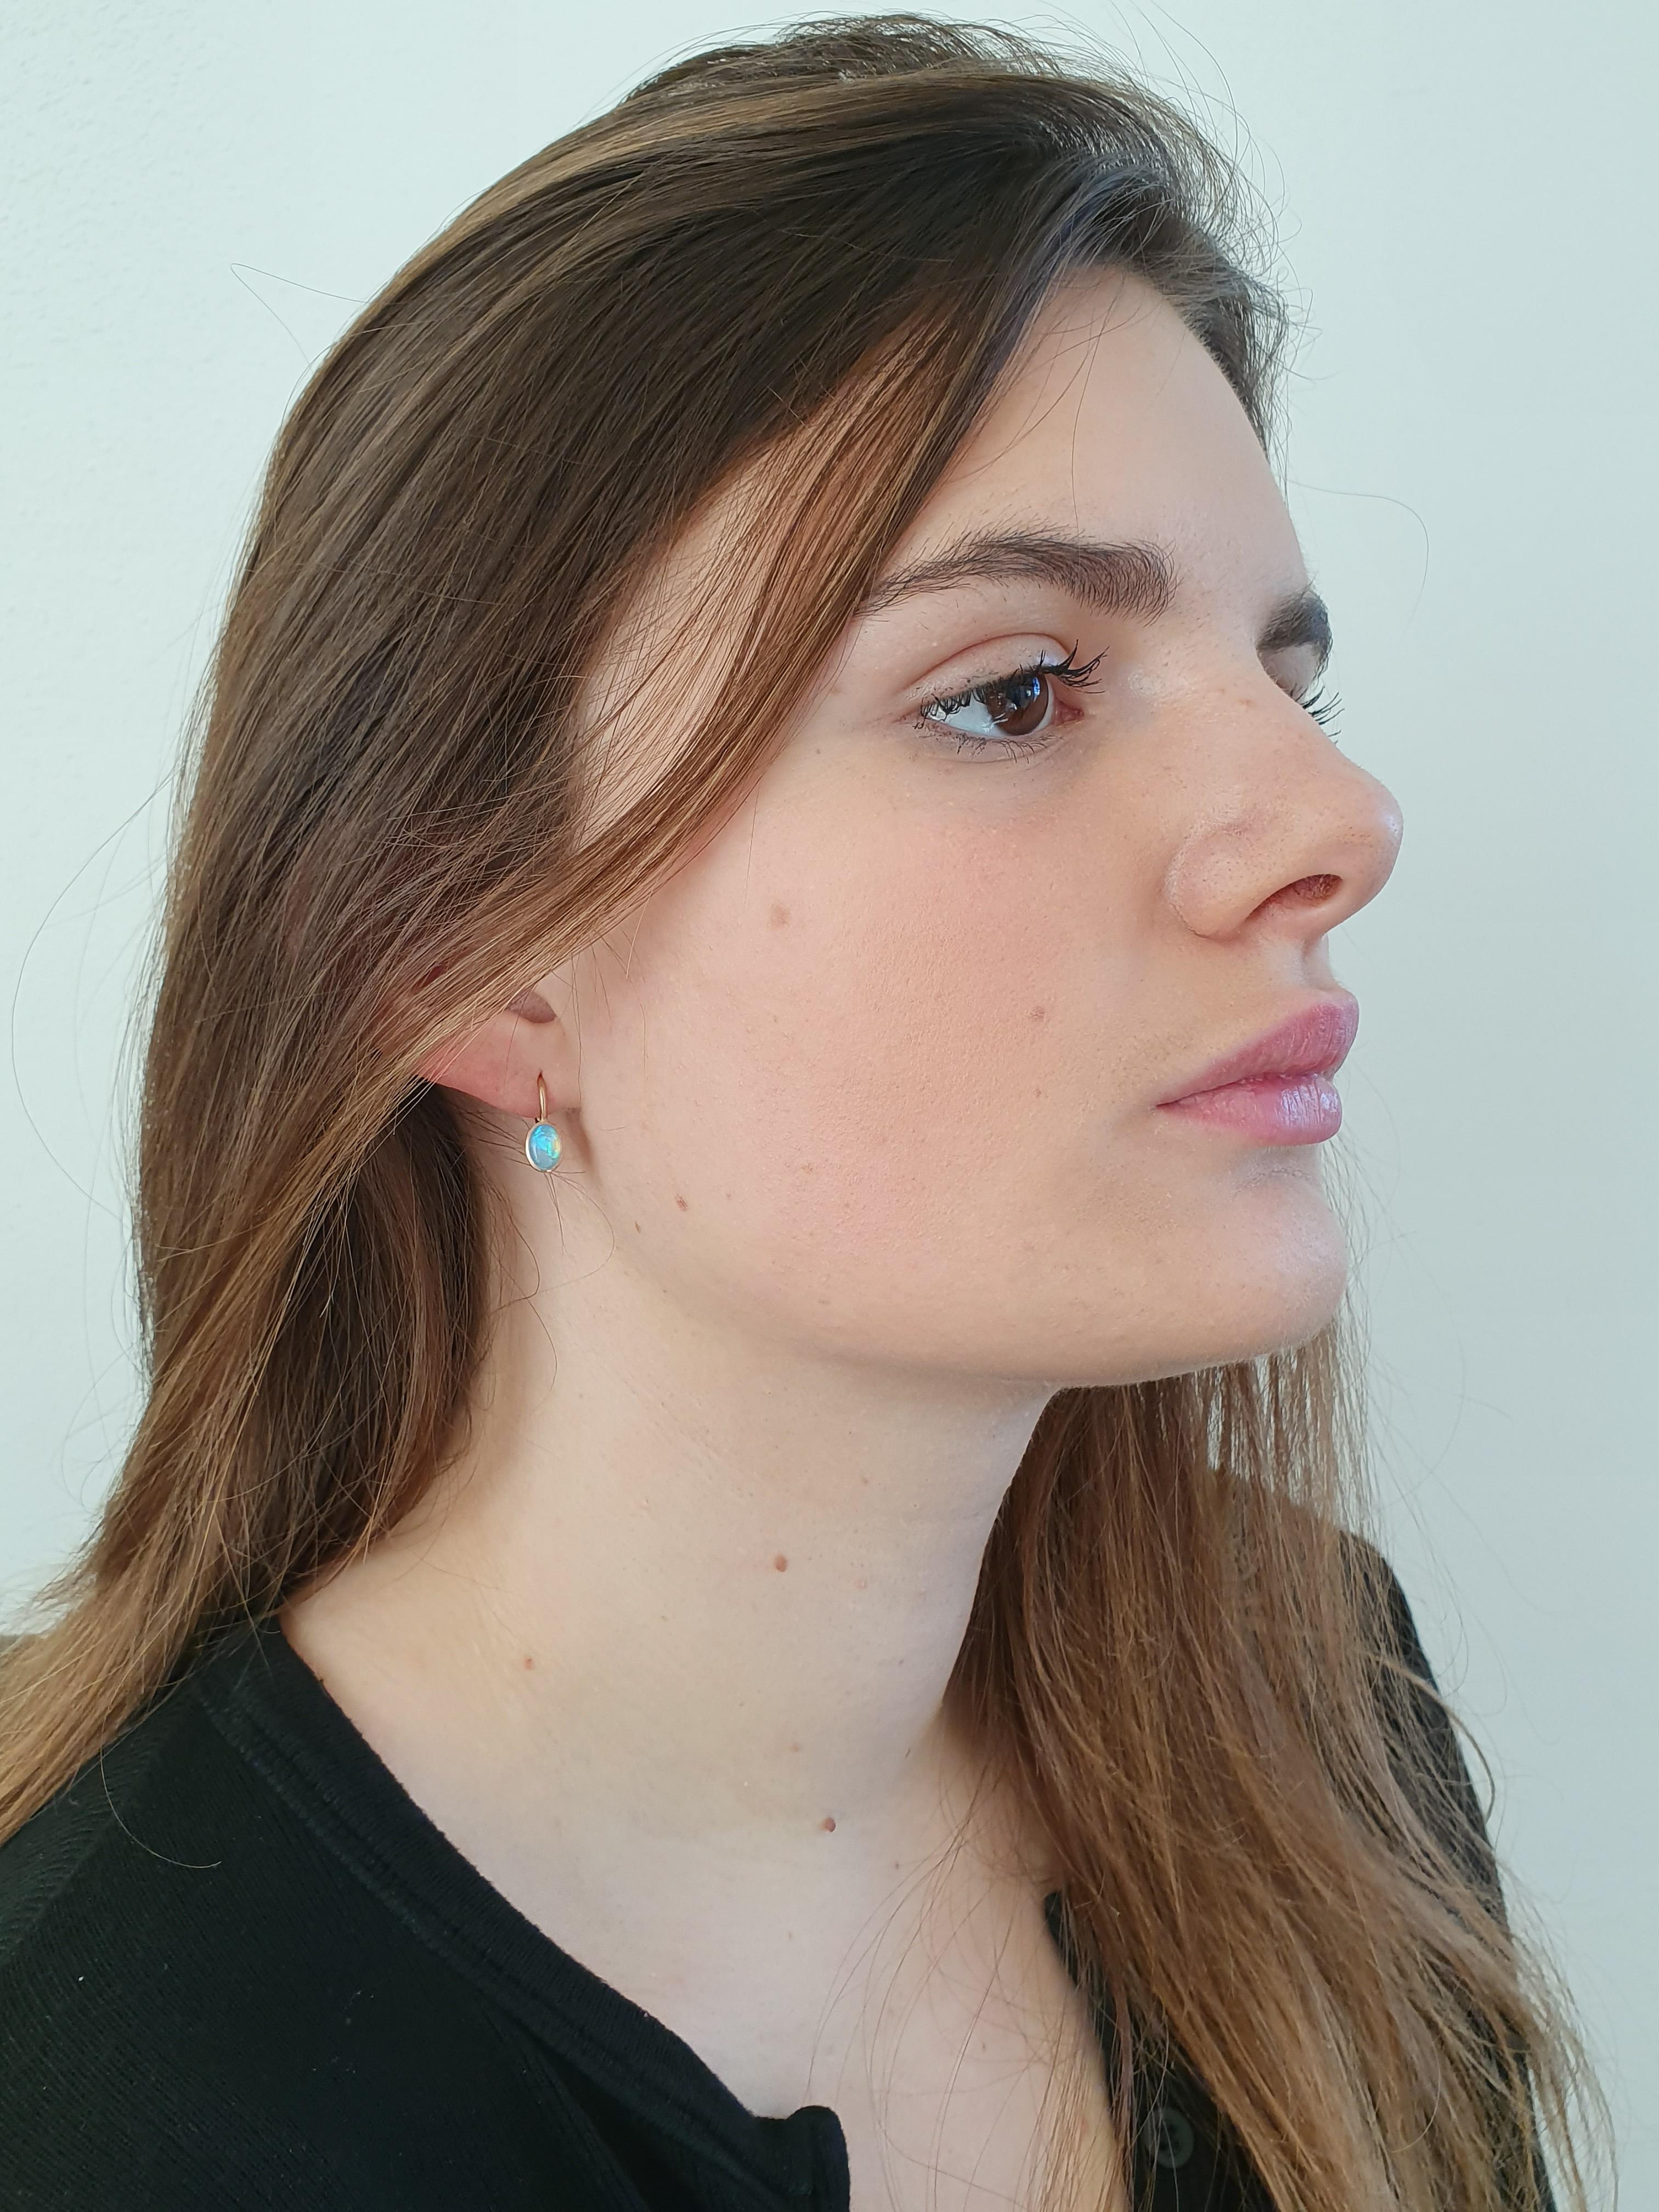 Dalben design  18k rose gold matte finishing tiny earrings with two bezel-set oval cabochon blue Australian solid opals weight 1,08 carats . 
Bezel stone dimensions :
width 6 mm
height without leverback 8 mm
height with leverback 15 mm
Consider that